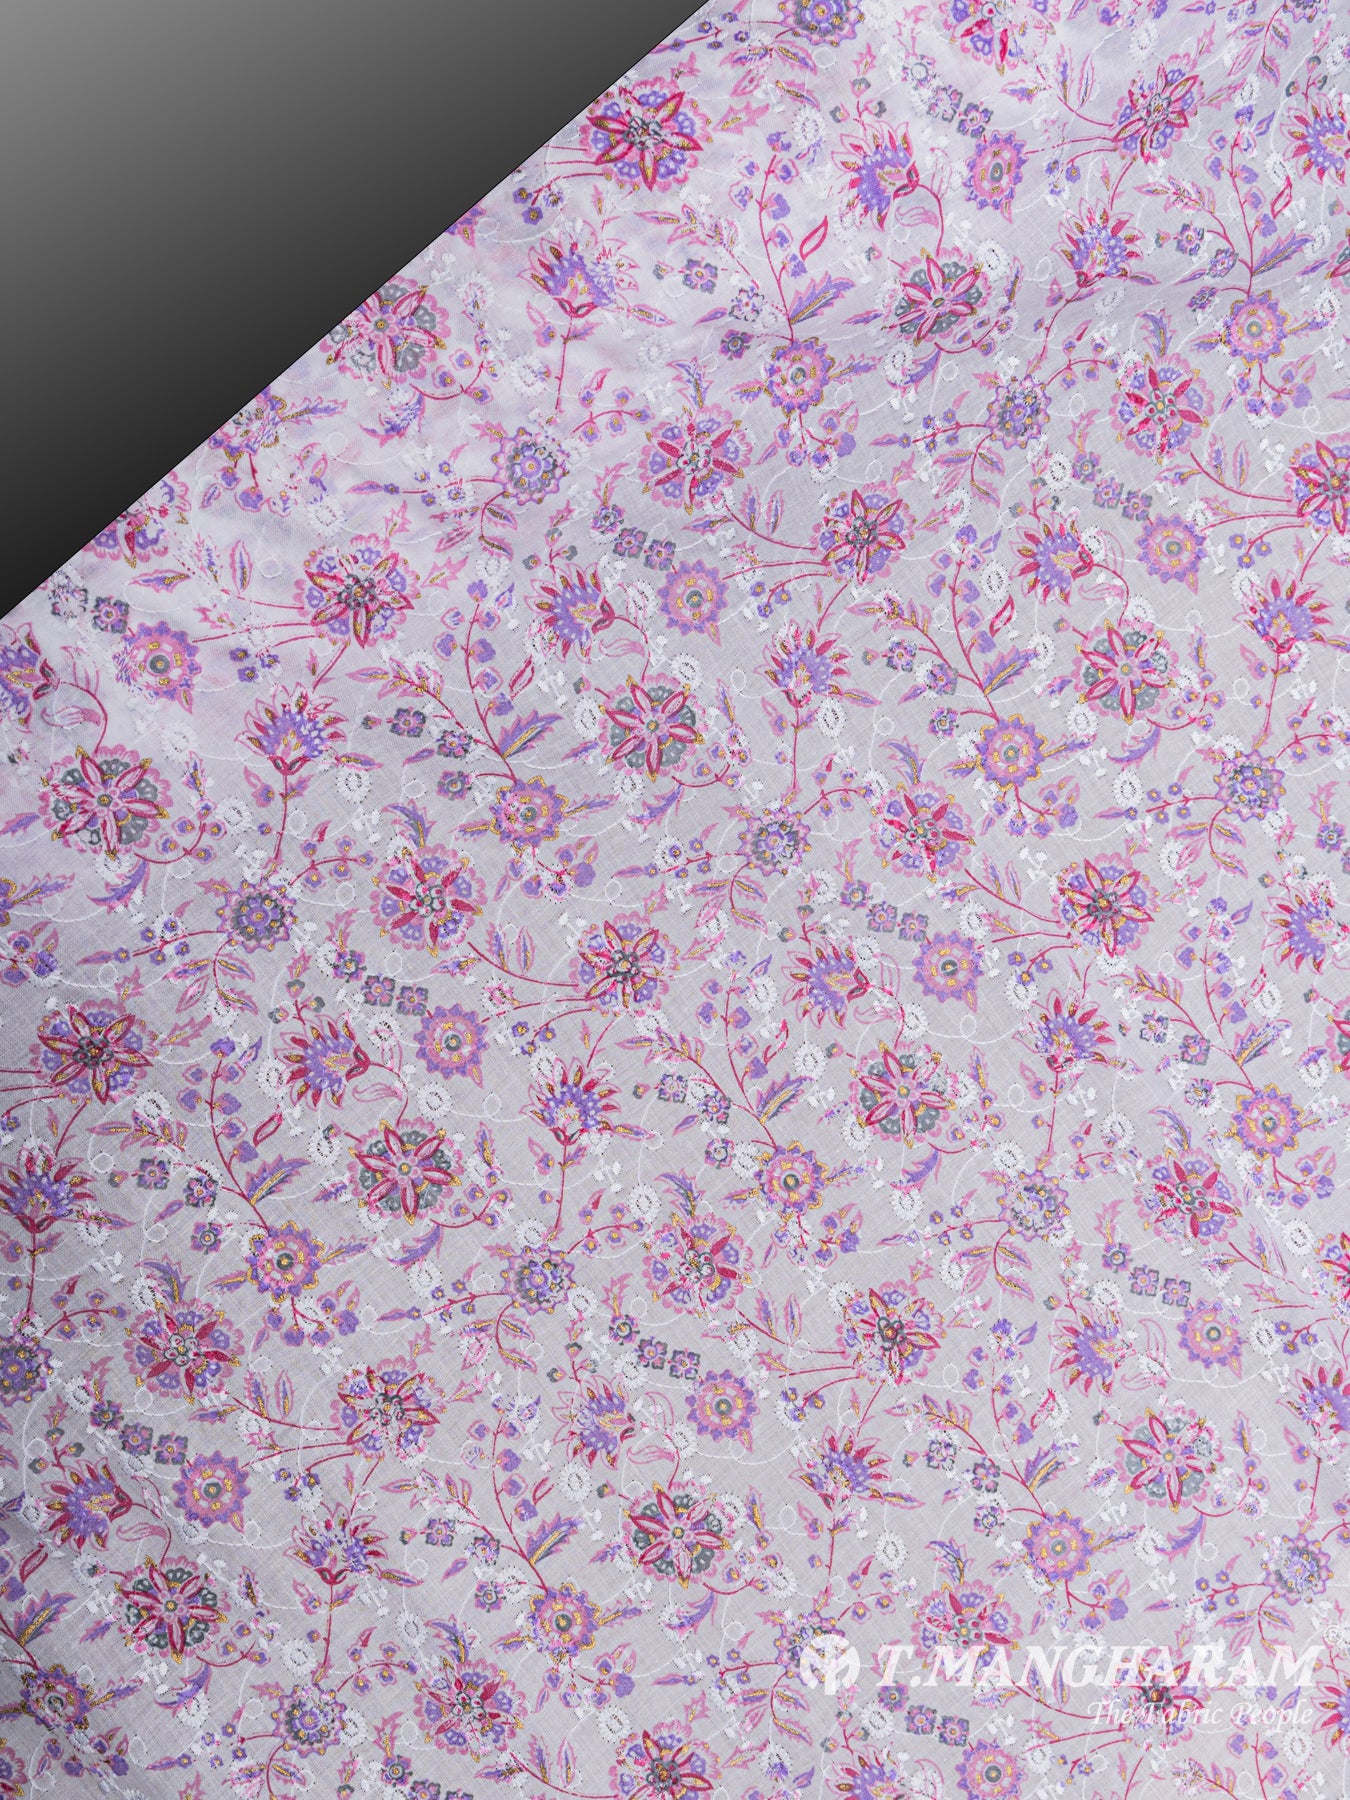 Violet Cotton Embroidery Fabric - EA1708 view-2